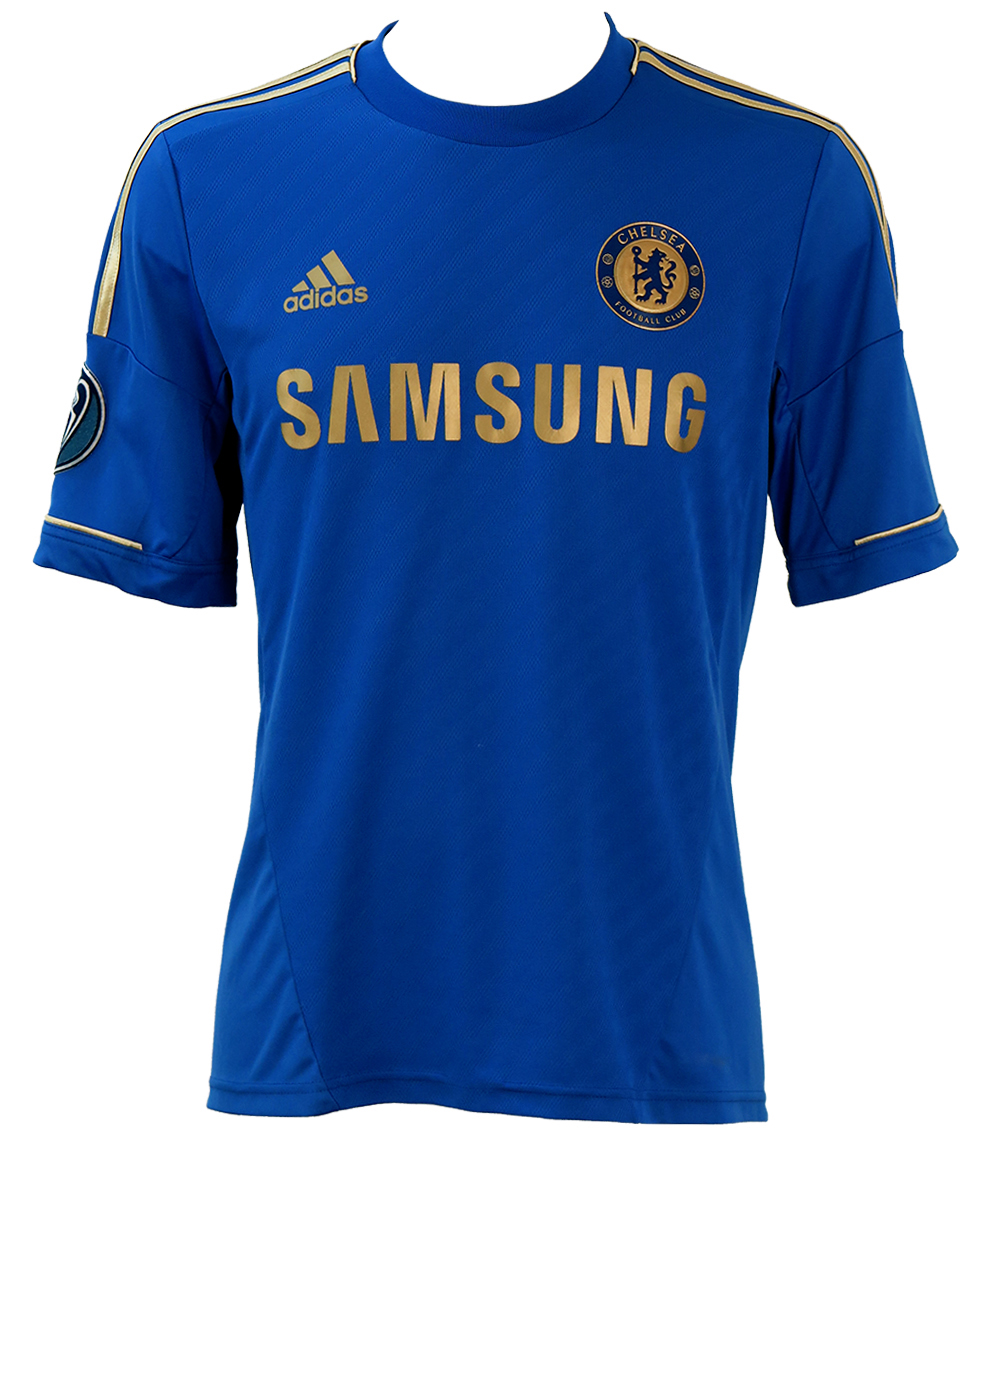 chelsea blue and gold jersey